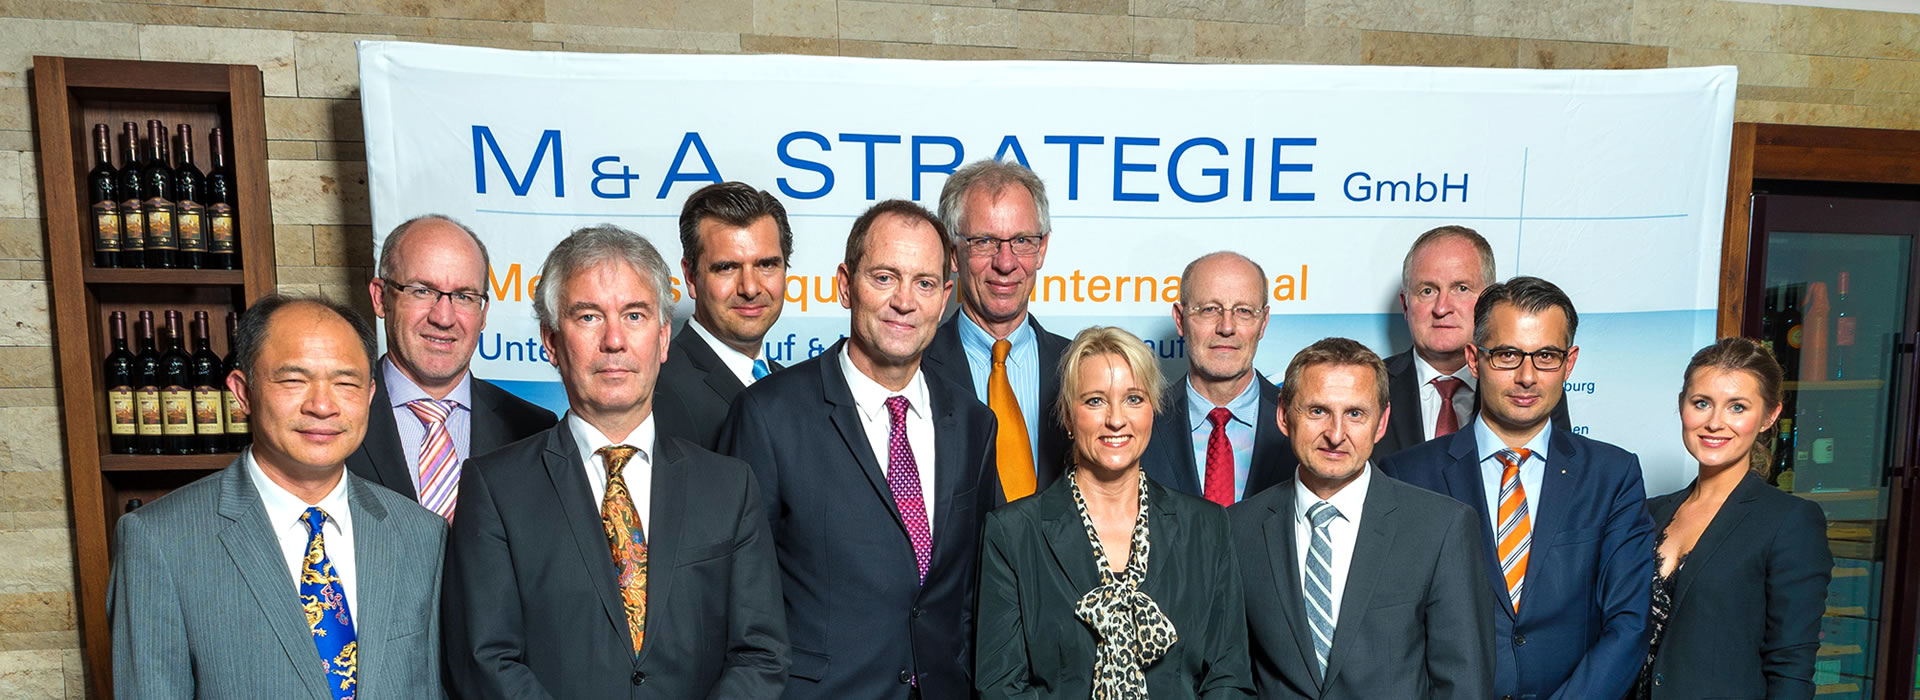 The Team of M & A STRATEGIE GmbH